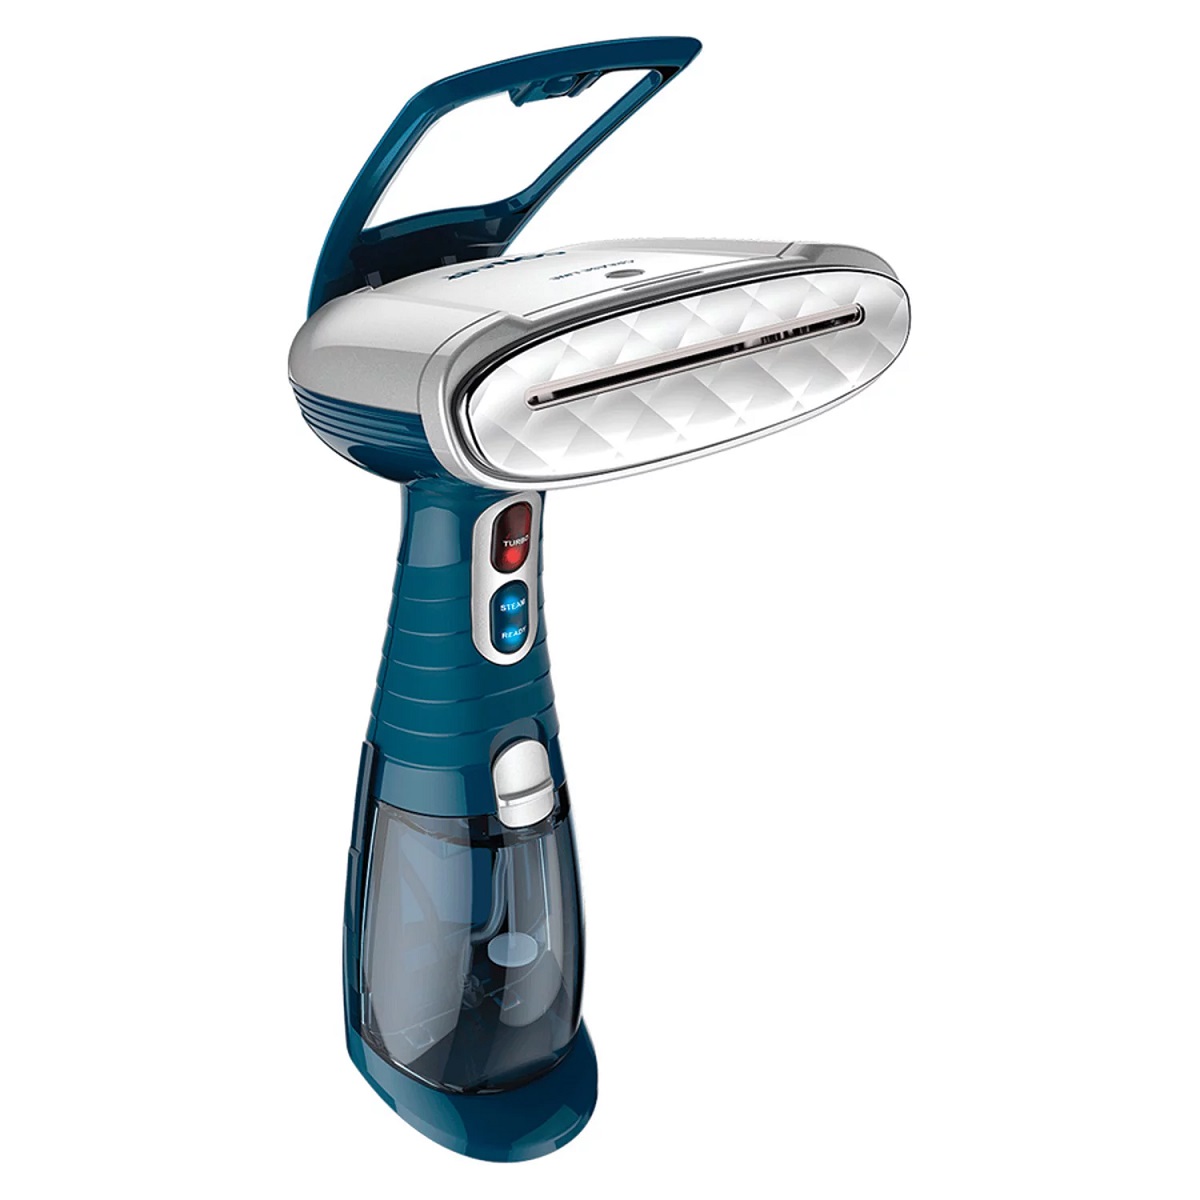 15 Amazing Conair Turbo Extreme Steam Handheld Fabric Steamer for 2023